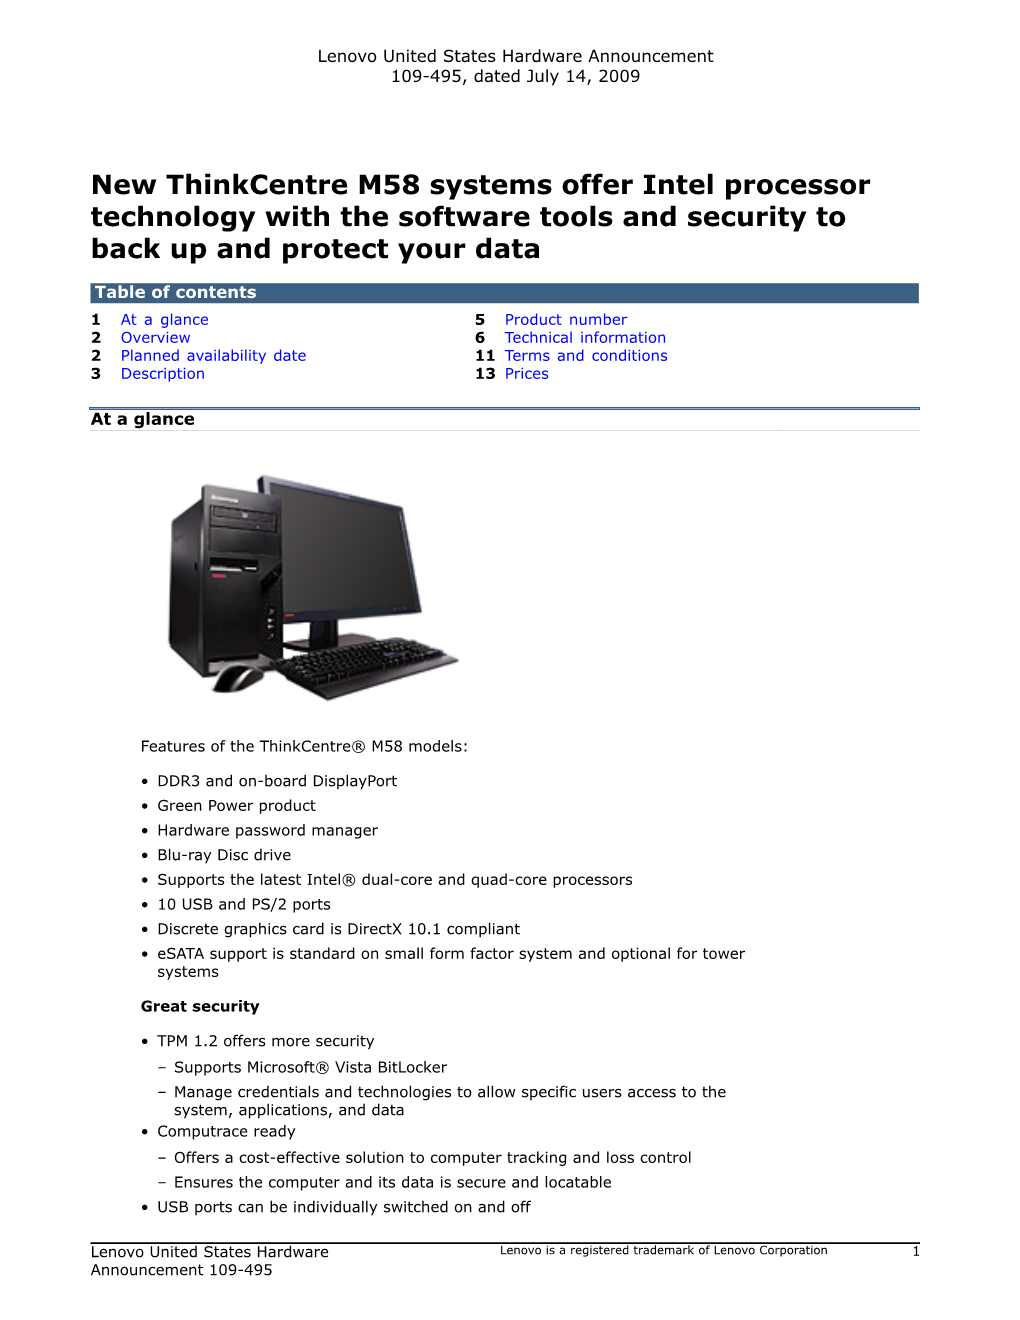 New Thinkcentre M58 Systems Offer Intel Processor Technology with the Software Tools and Security to Back up and Protect Your Data